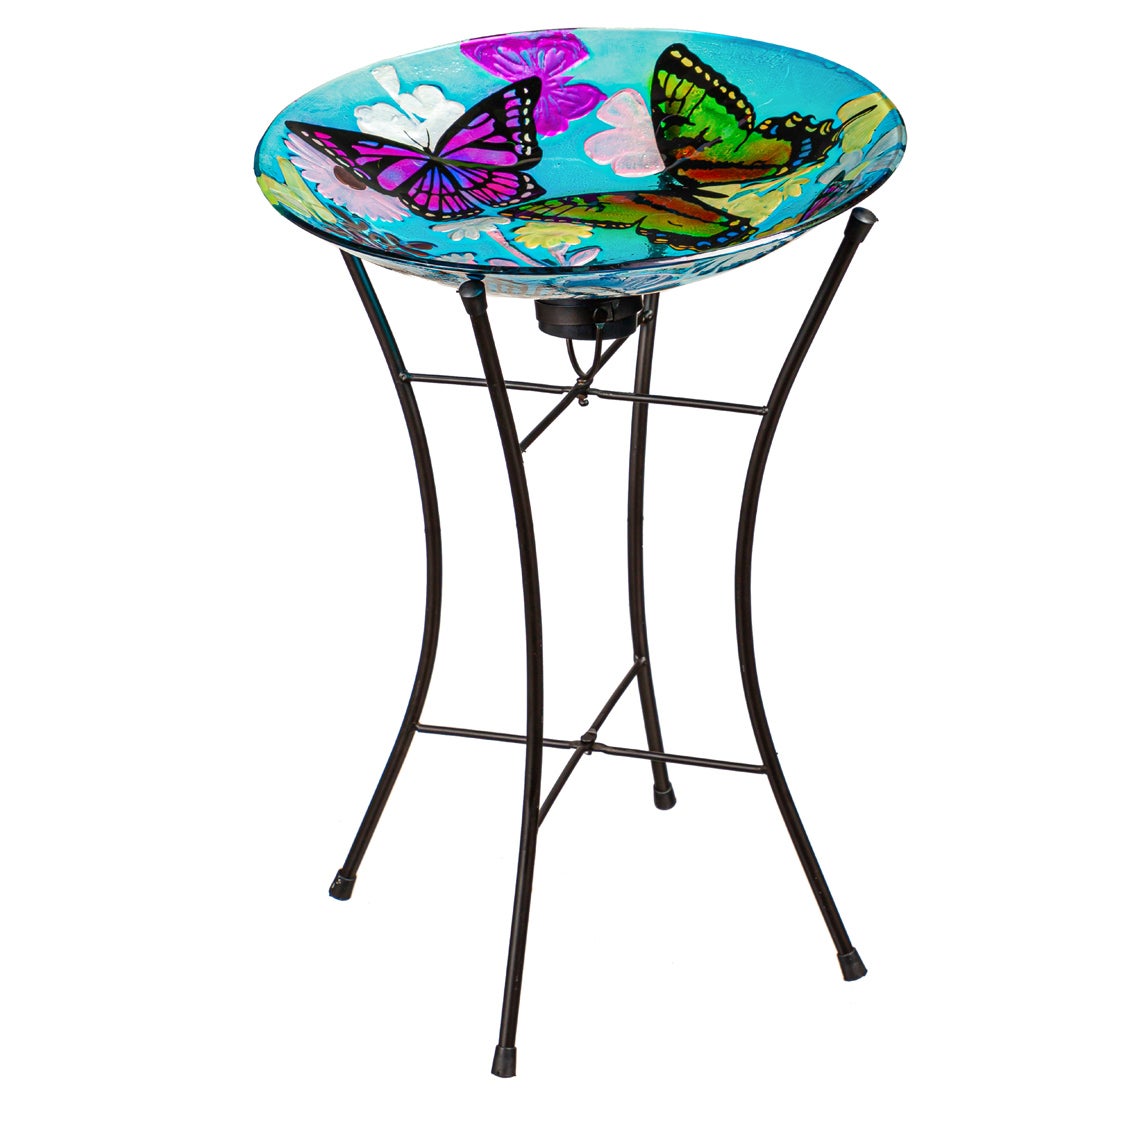 15" Bountiful Butterfly Hand Painted Embossed Glass Bird Bath with Solar Stand